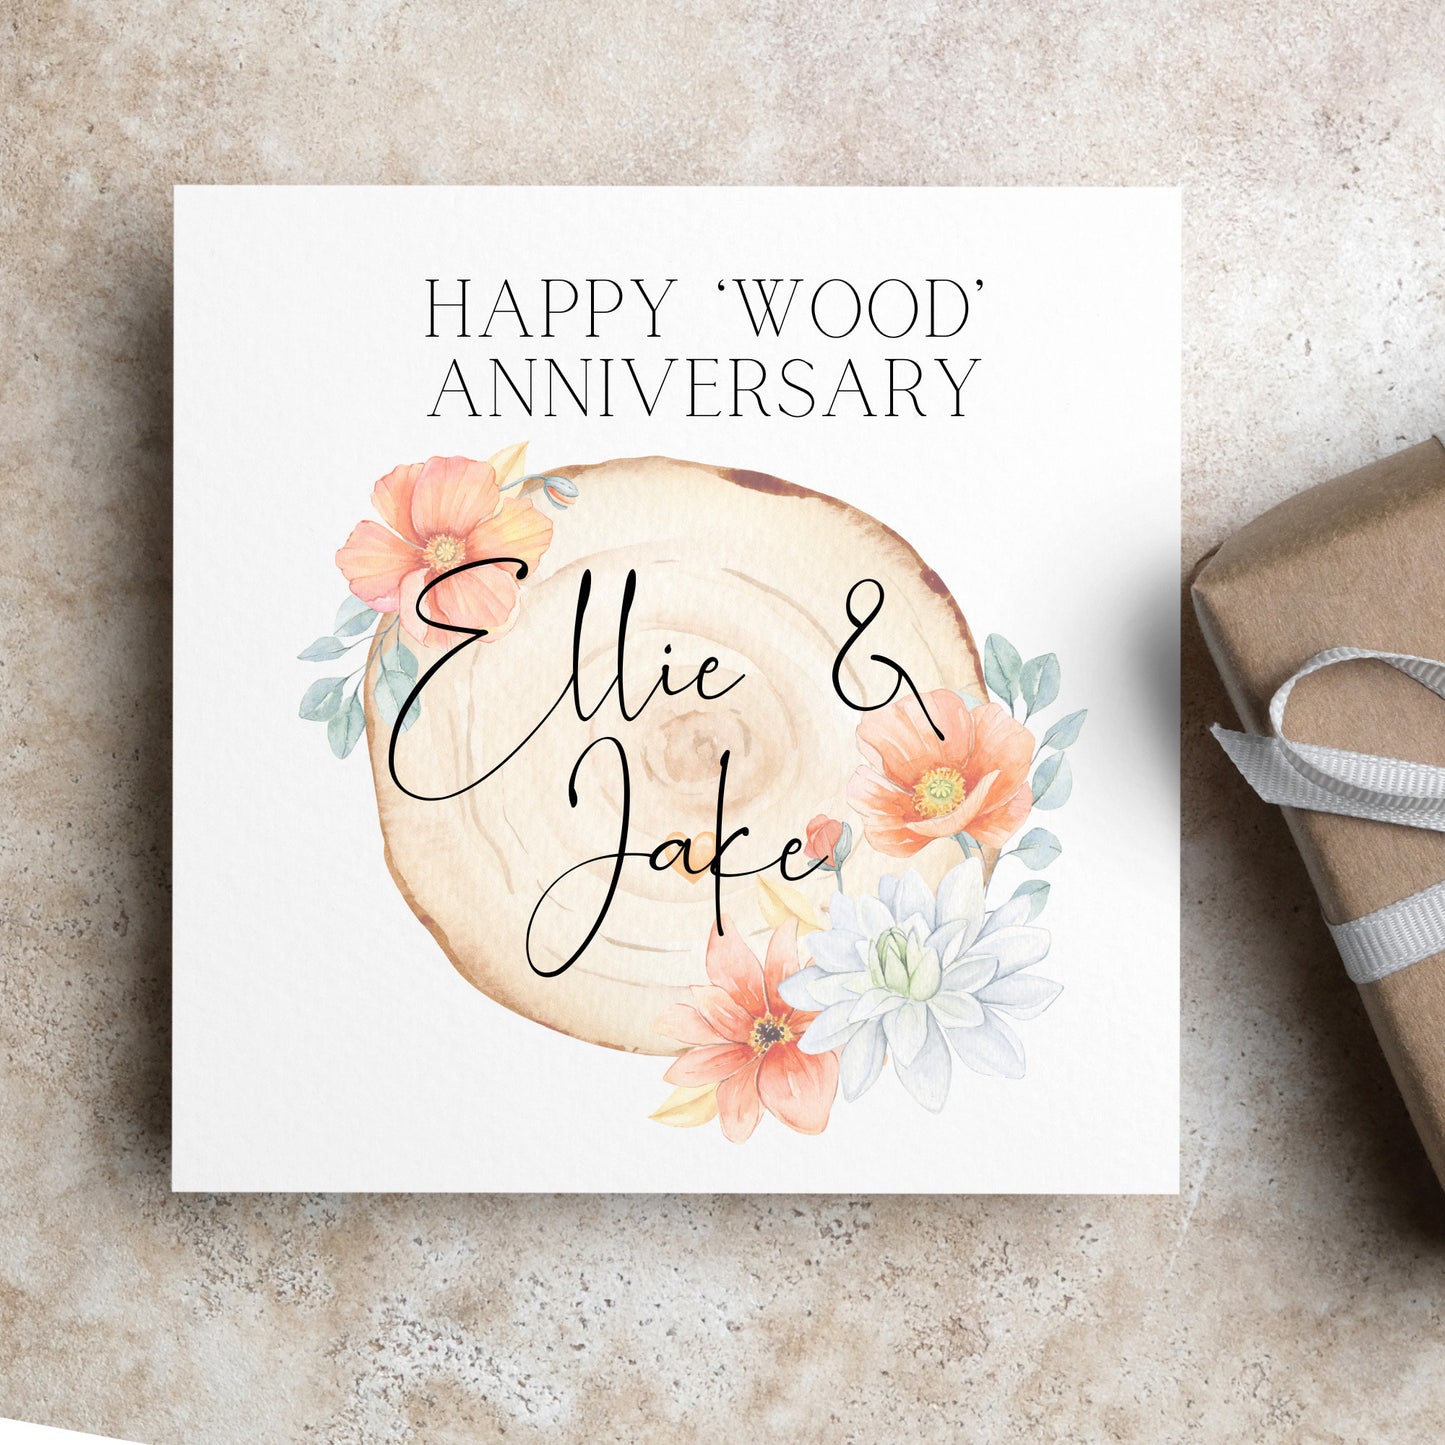 Fifth anniversary card,Autumn wood wedding anniversary card for wife or husband on five years married, autumn flowers and log